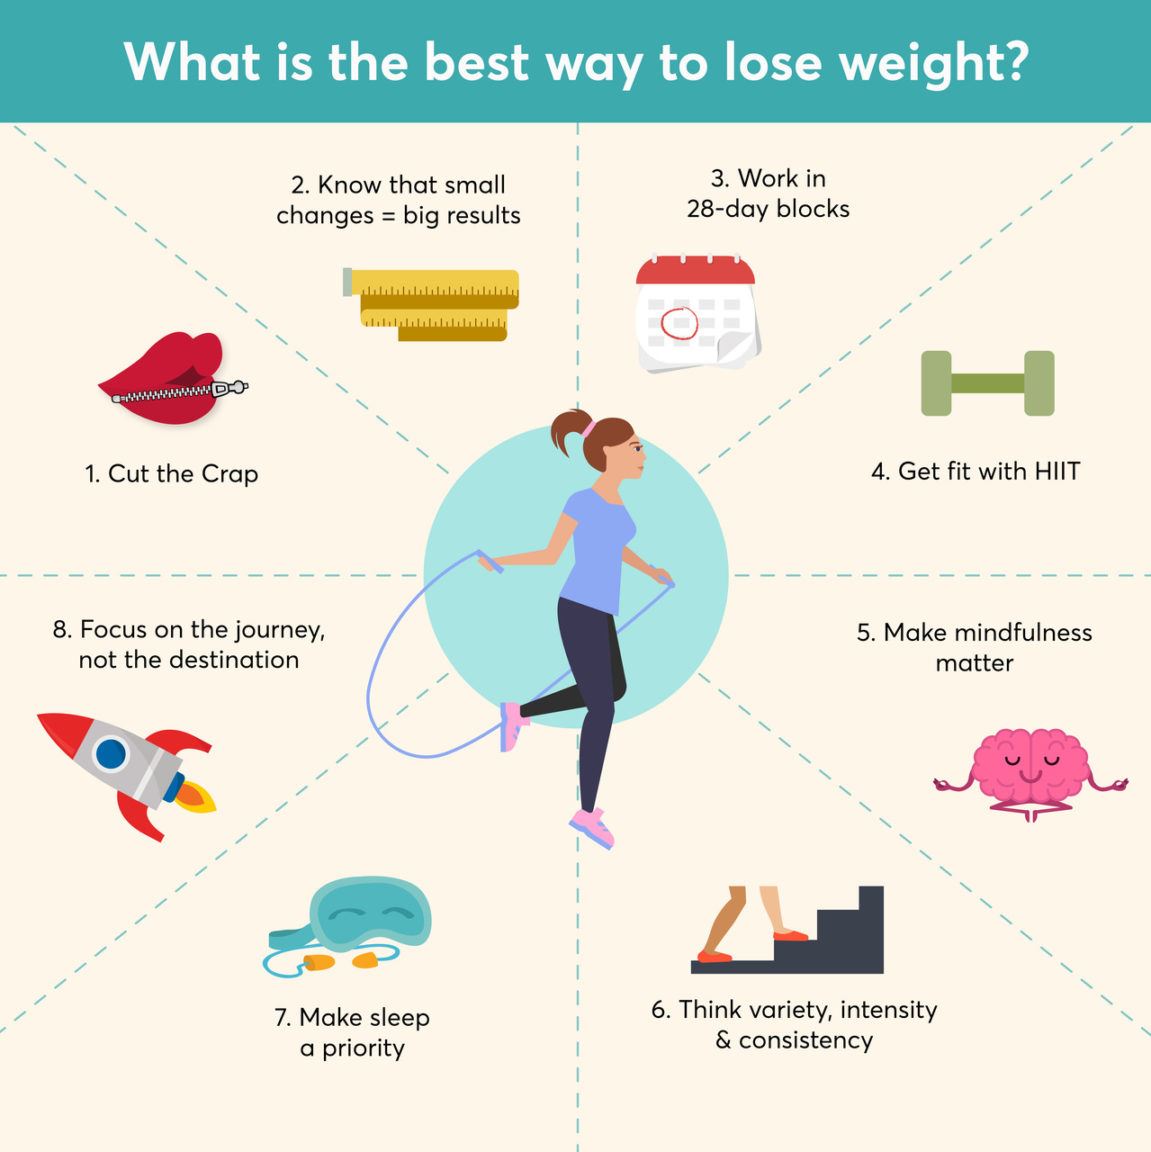 Top 5 Ways to Help Lose Weight – Eye of the Hurricane